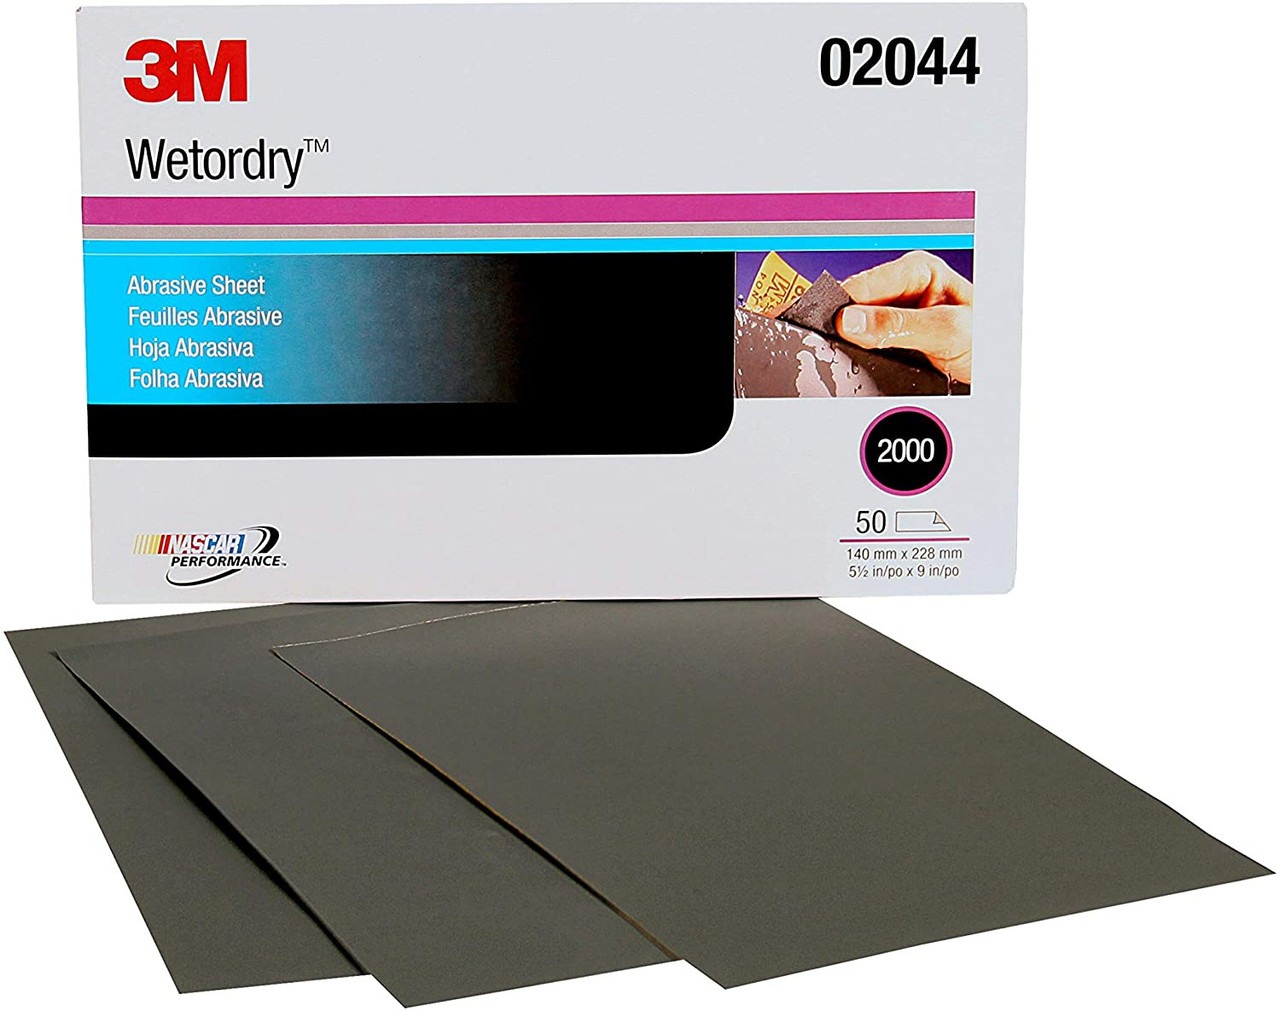 3M 02044 Imperial Wet or Dry 5-1/2" x 9" 2000A Grit Sheets (50 Pack)